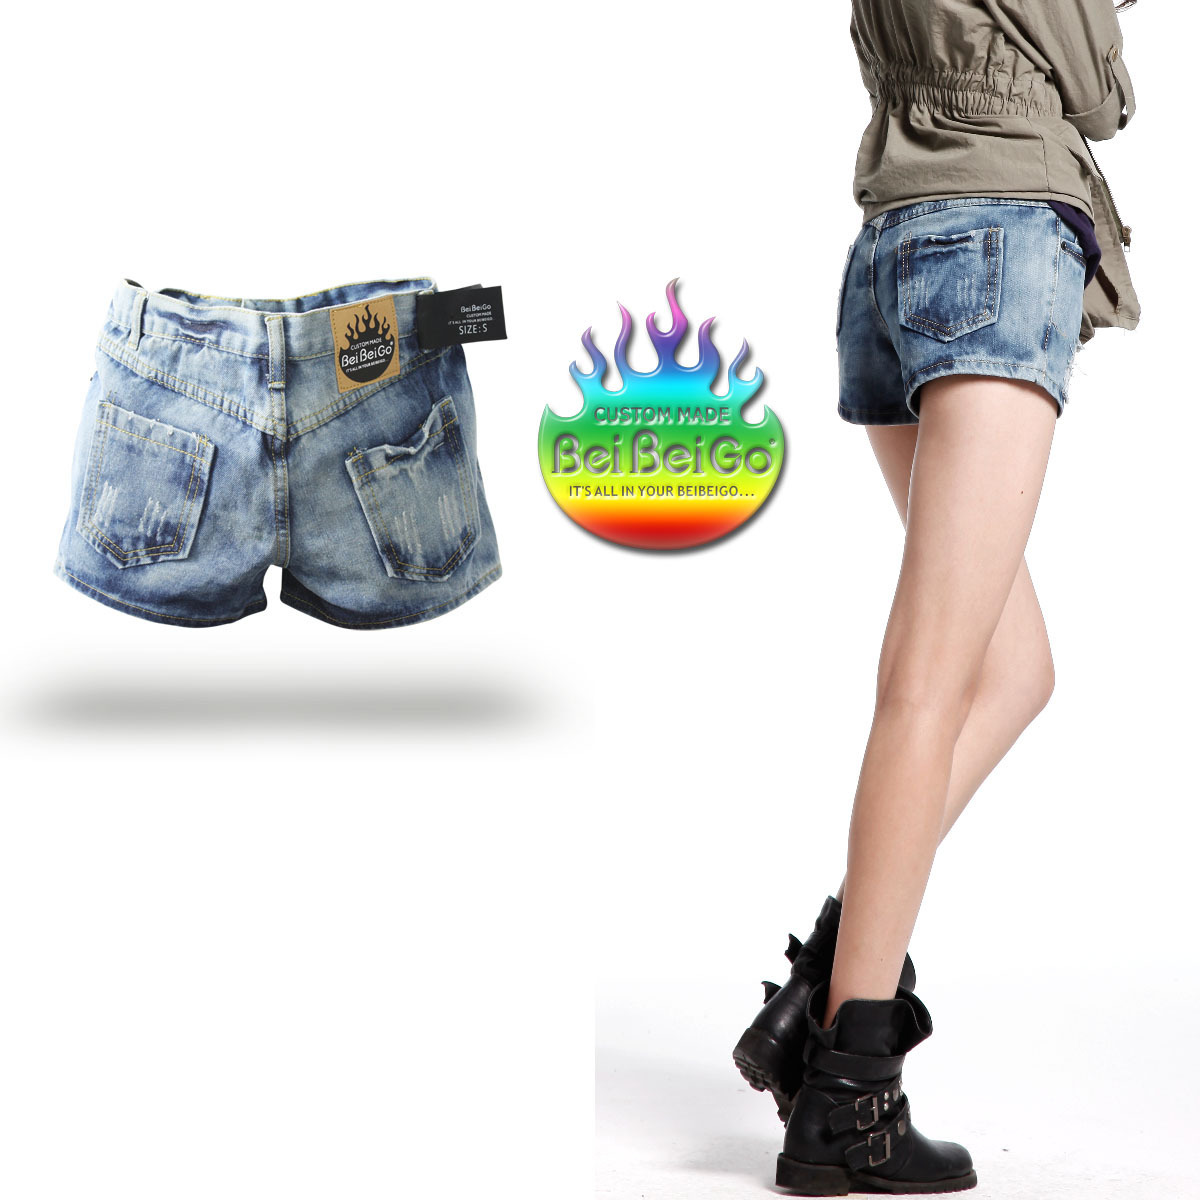 New Arrival Beibeigo casual 2012 spring new arrival all-match denim shorts boot cut jeans women's free shipping wholesale